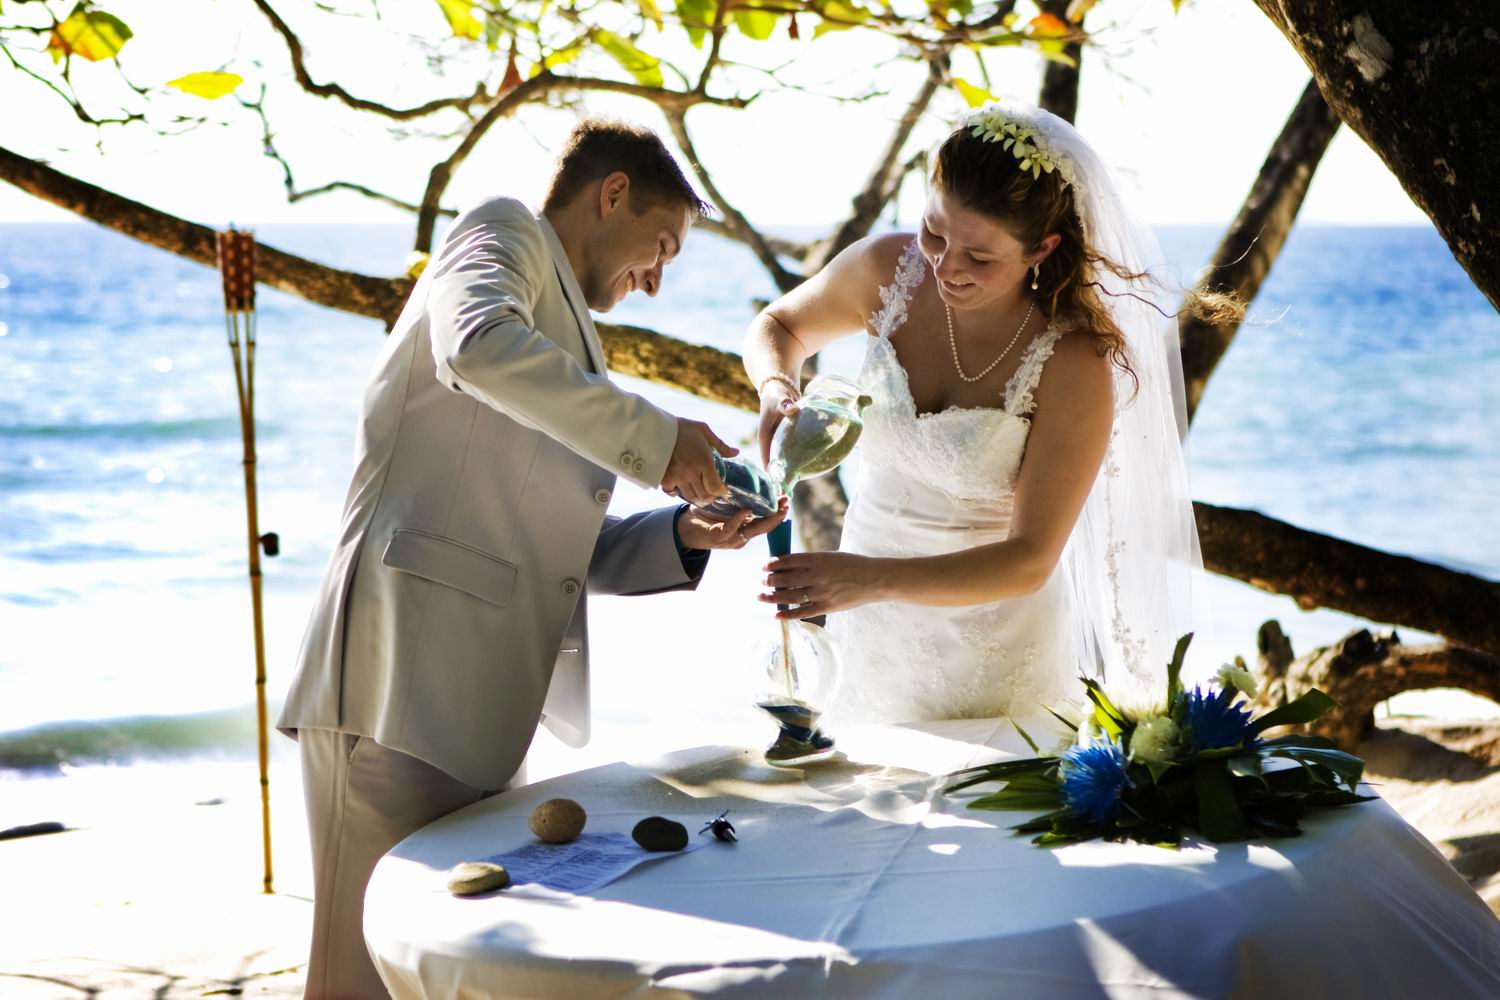 Bride and groom pour sand into marriage bottle at beach wedding